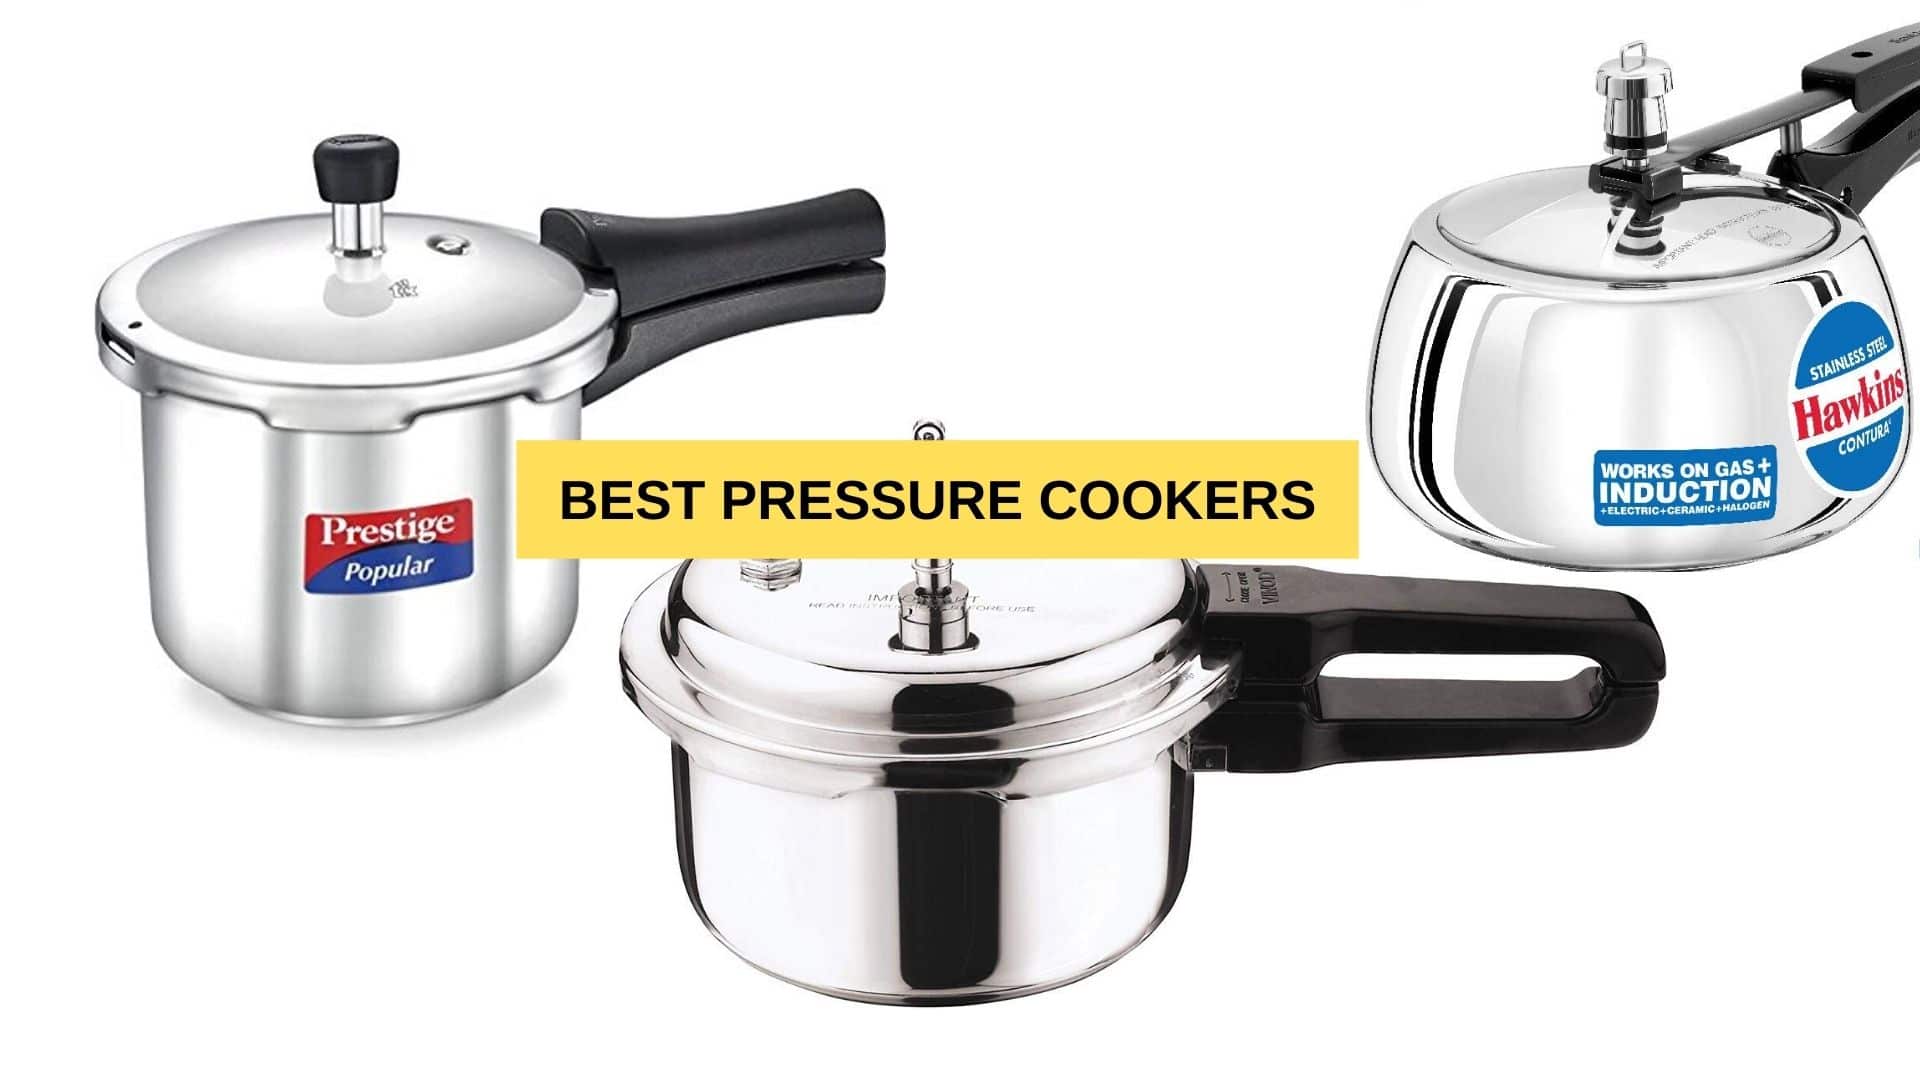 Best Stainless Steel Pressure Cooker For Students Mishry Reviews,Sympathy Message